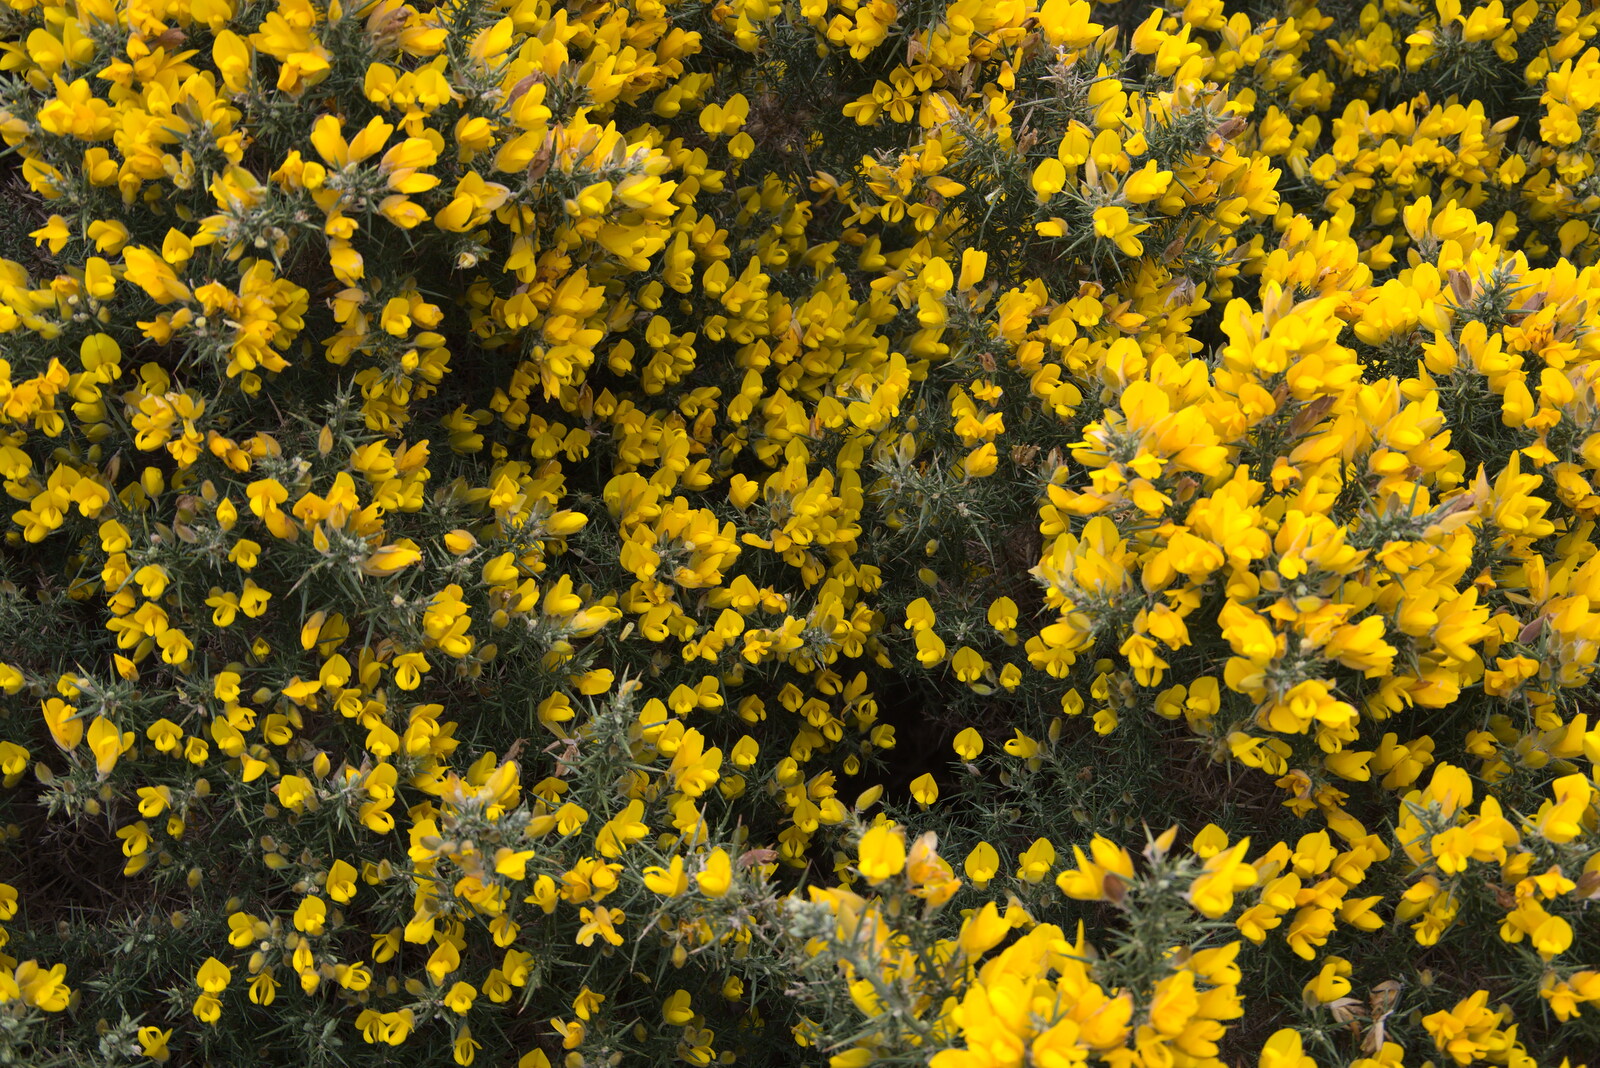 The gorse is in bloom from A Trip to Dunwich Beach, Dunwich, Suffolk - 2nd April 2021